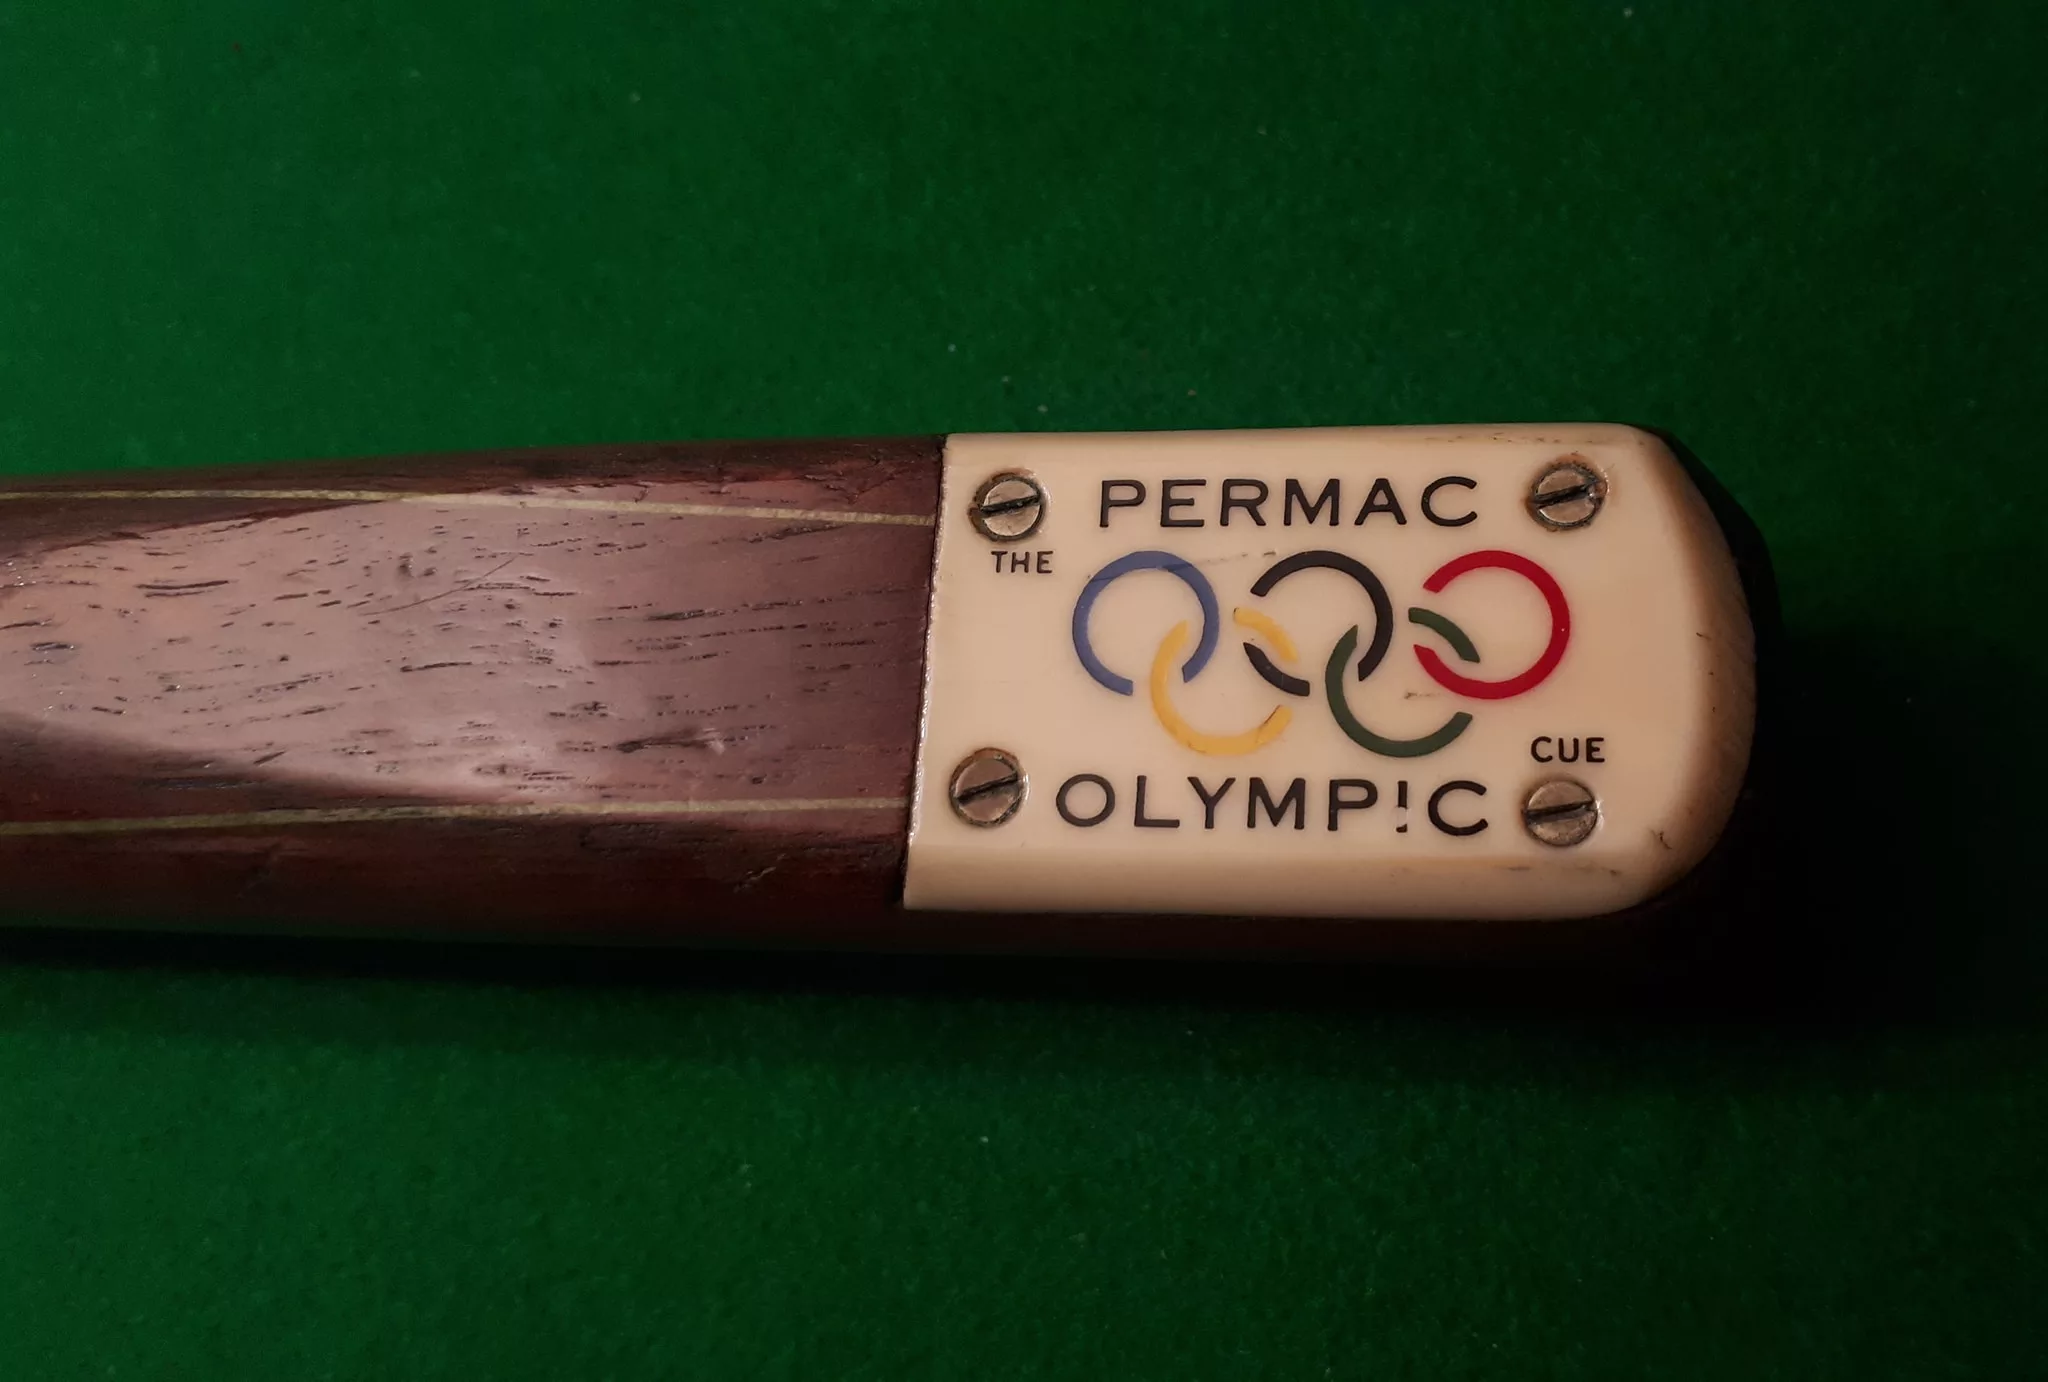 Olympic cue